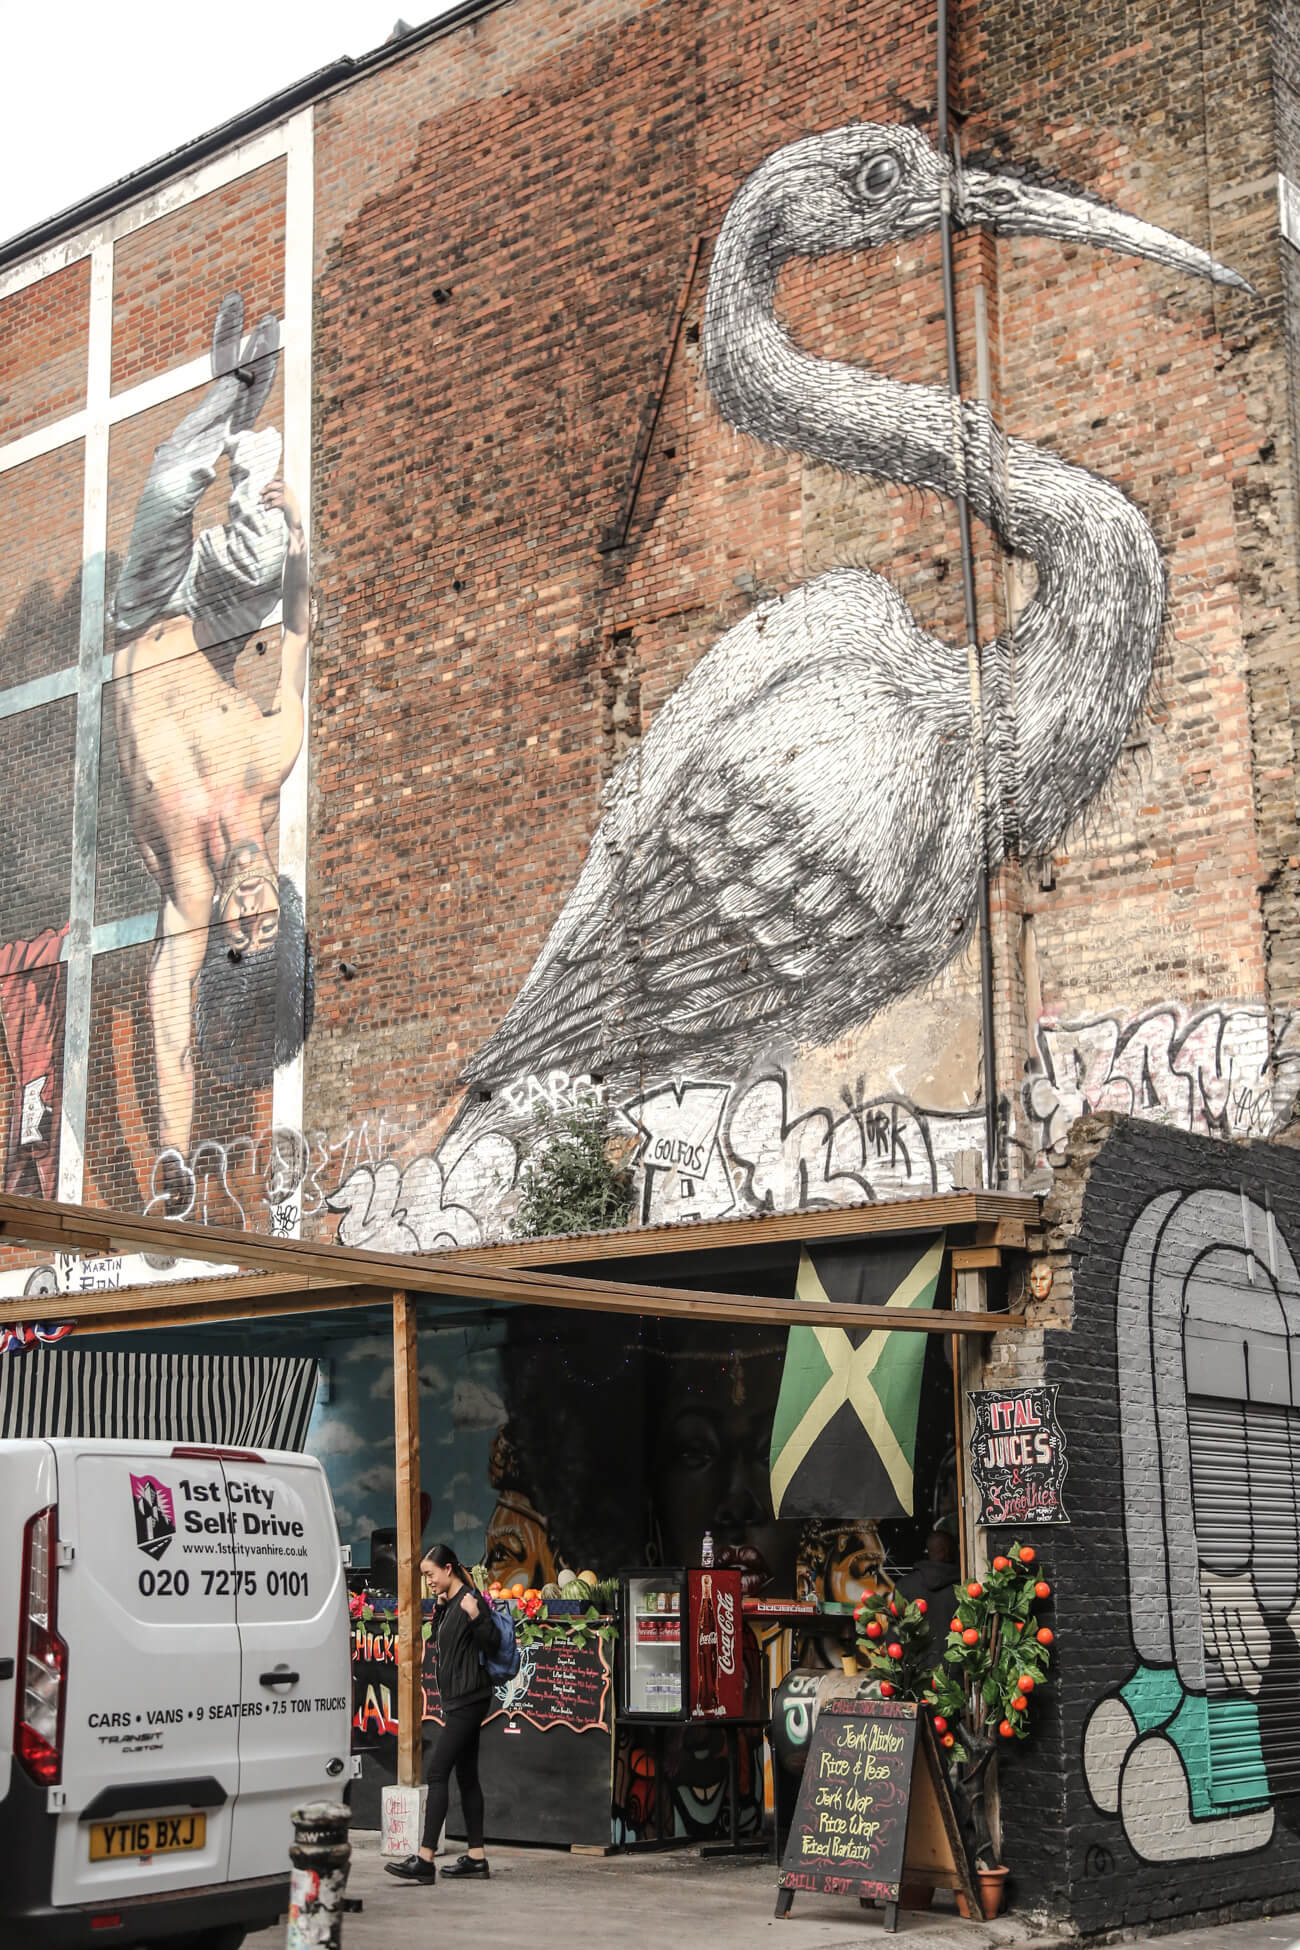 A Backpackers Guide To Shoreditch, London | Where's Mollie - A travel and adventure lifestyle blog-28